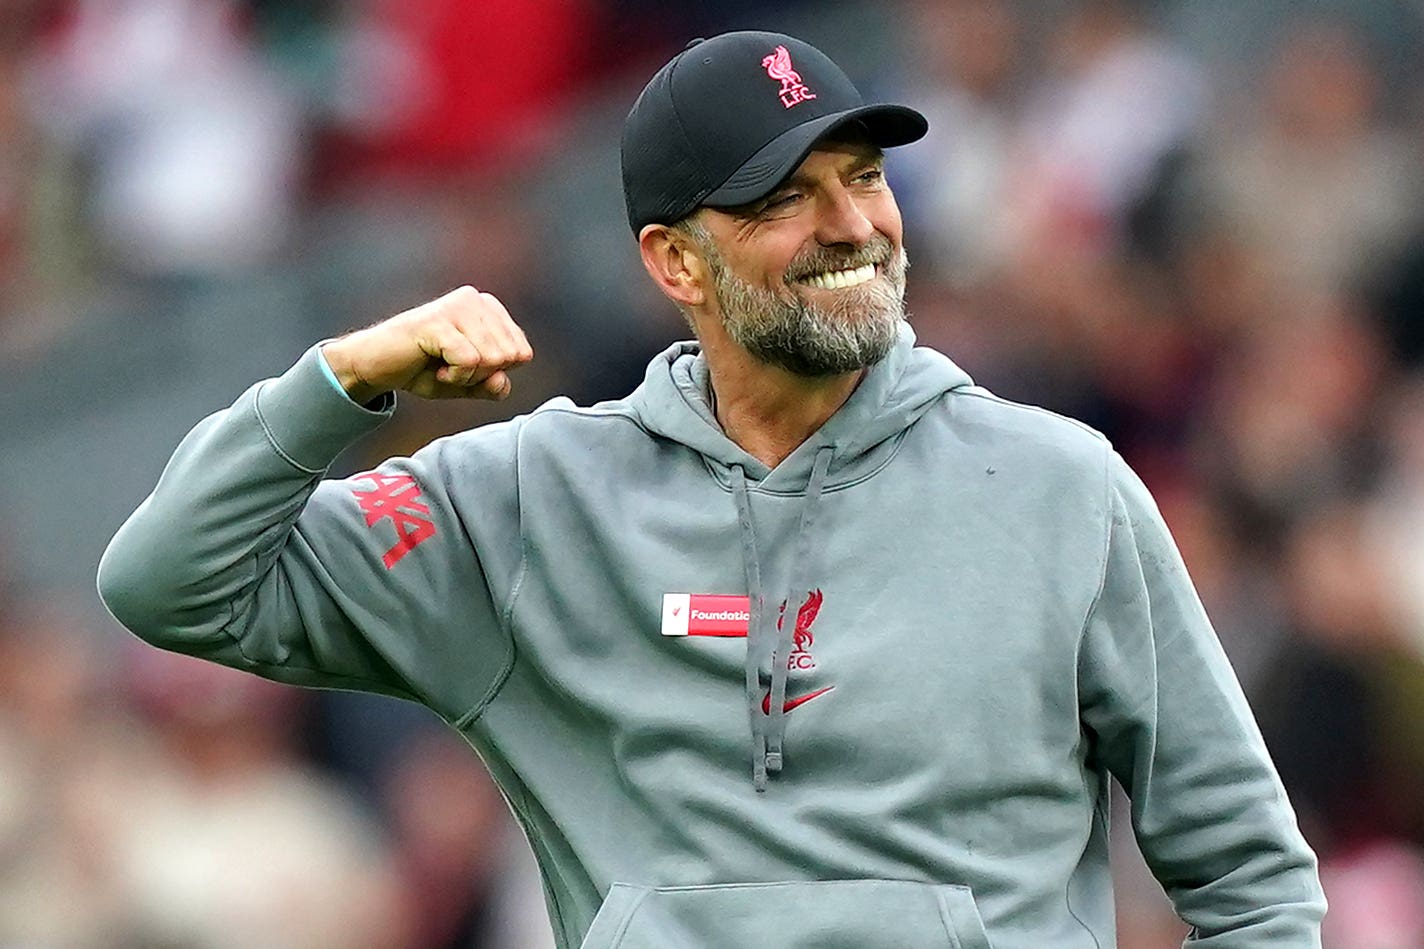 Jurgen Klopp is excited for the season ahead (Mike Egerton/PA)